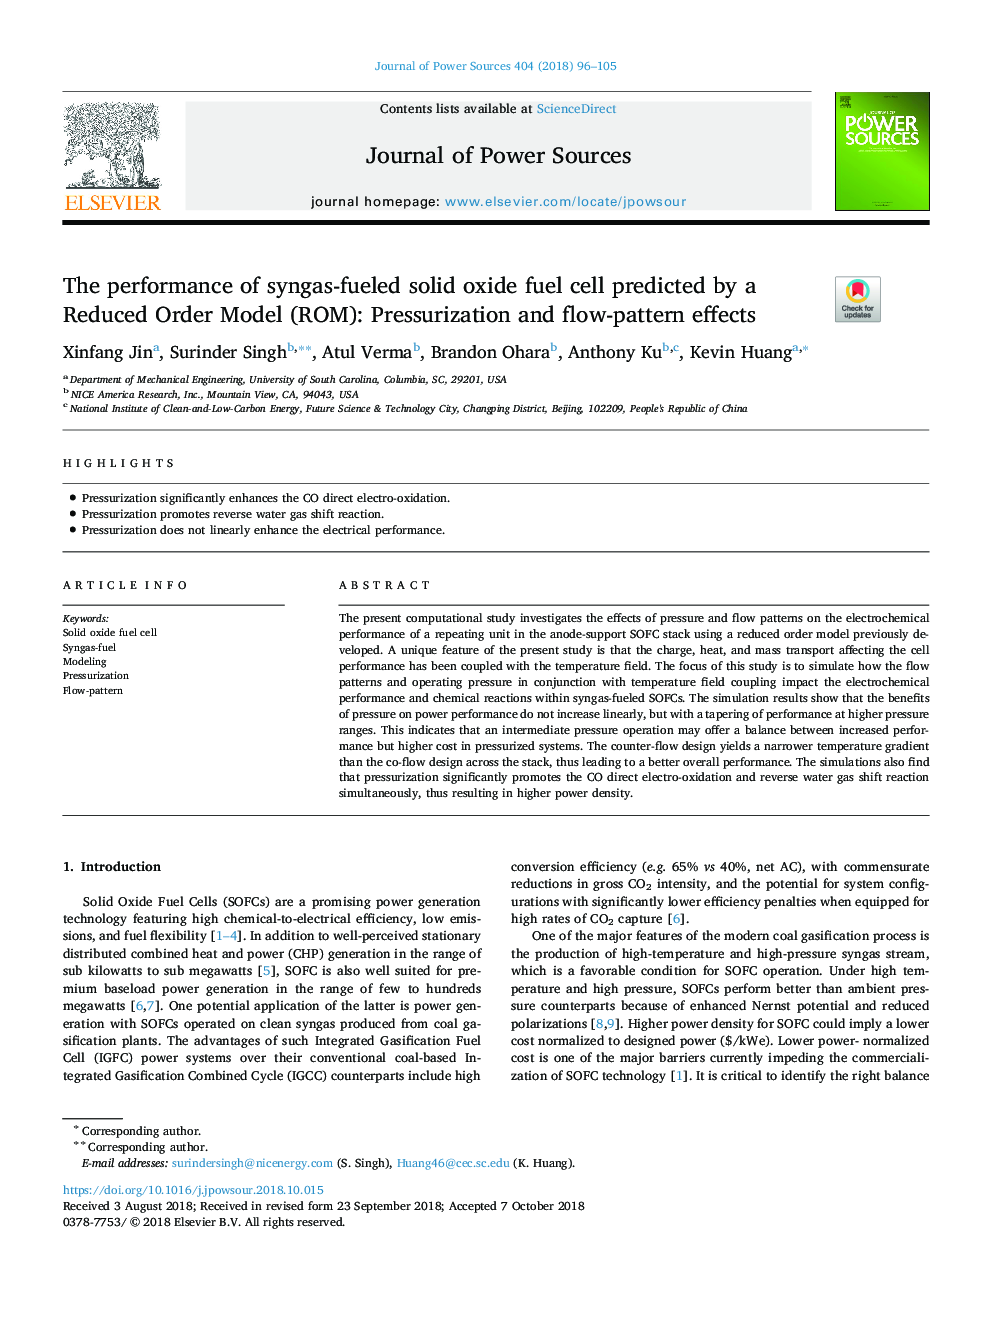 The performance of syngas-fueled solid oxide fuel cell predicted by a Reduced Order Model (ROM): Pressurization and flow-pattern effects